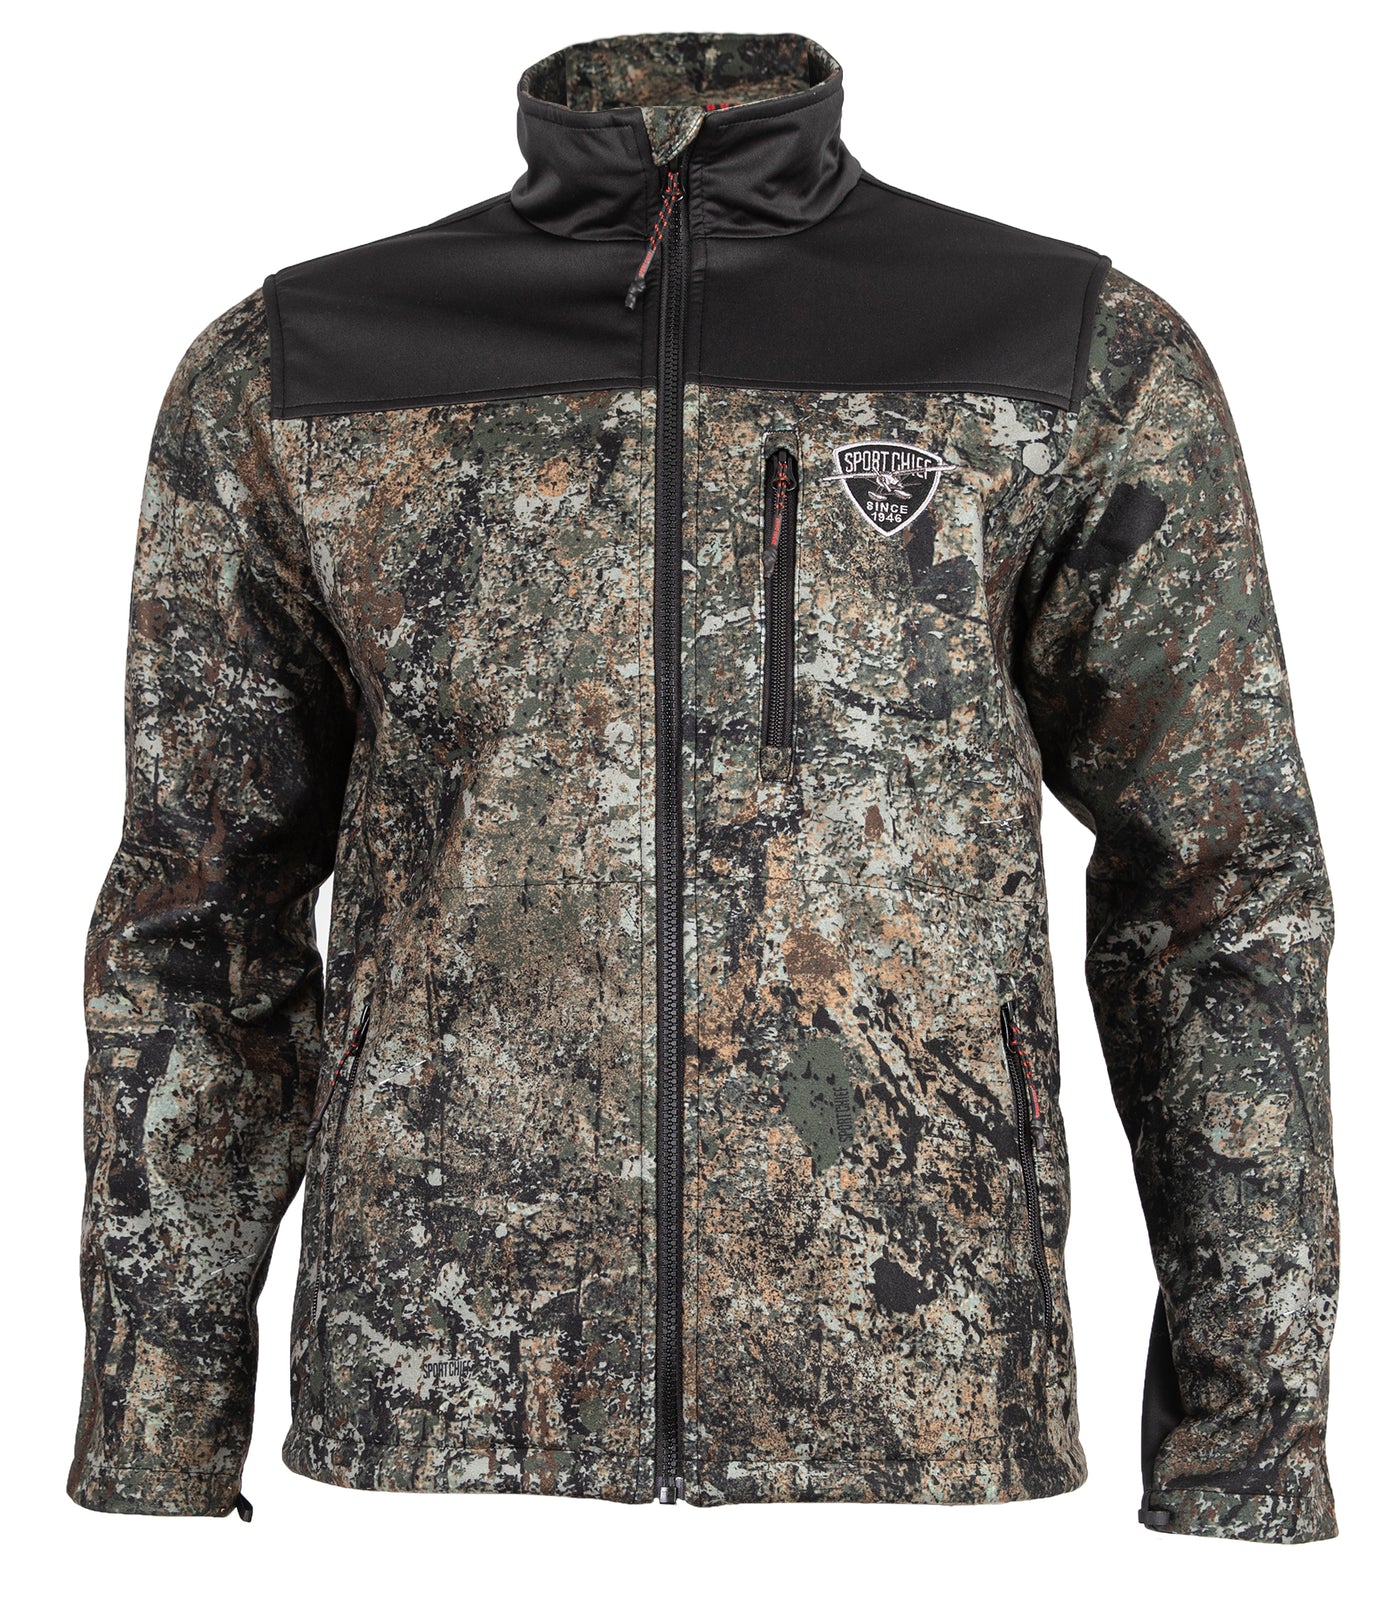 Hunting jacket "Rode Liner" man camo "The Ripper"